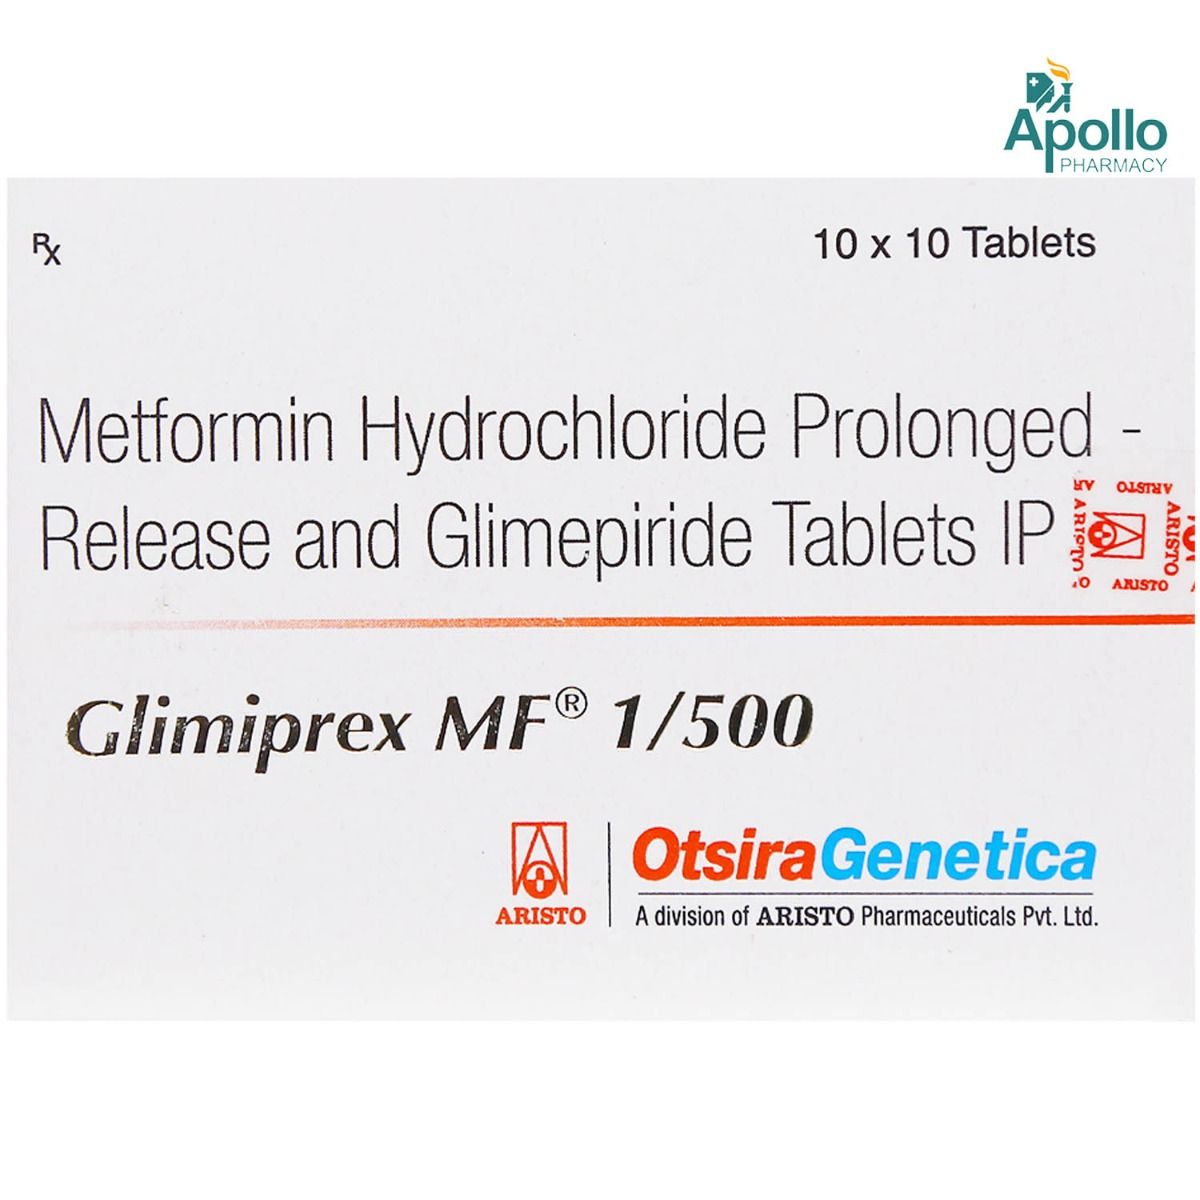 Glimiprex Mf 1 500mg Tablet Price Uses Side Effects Composition Apollo 24 7